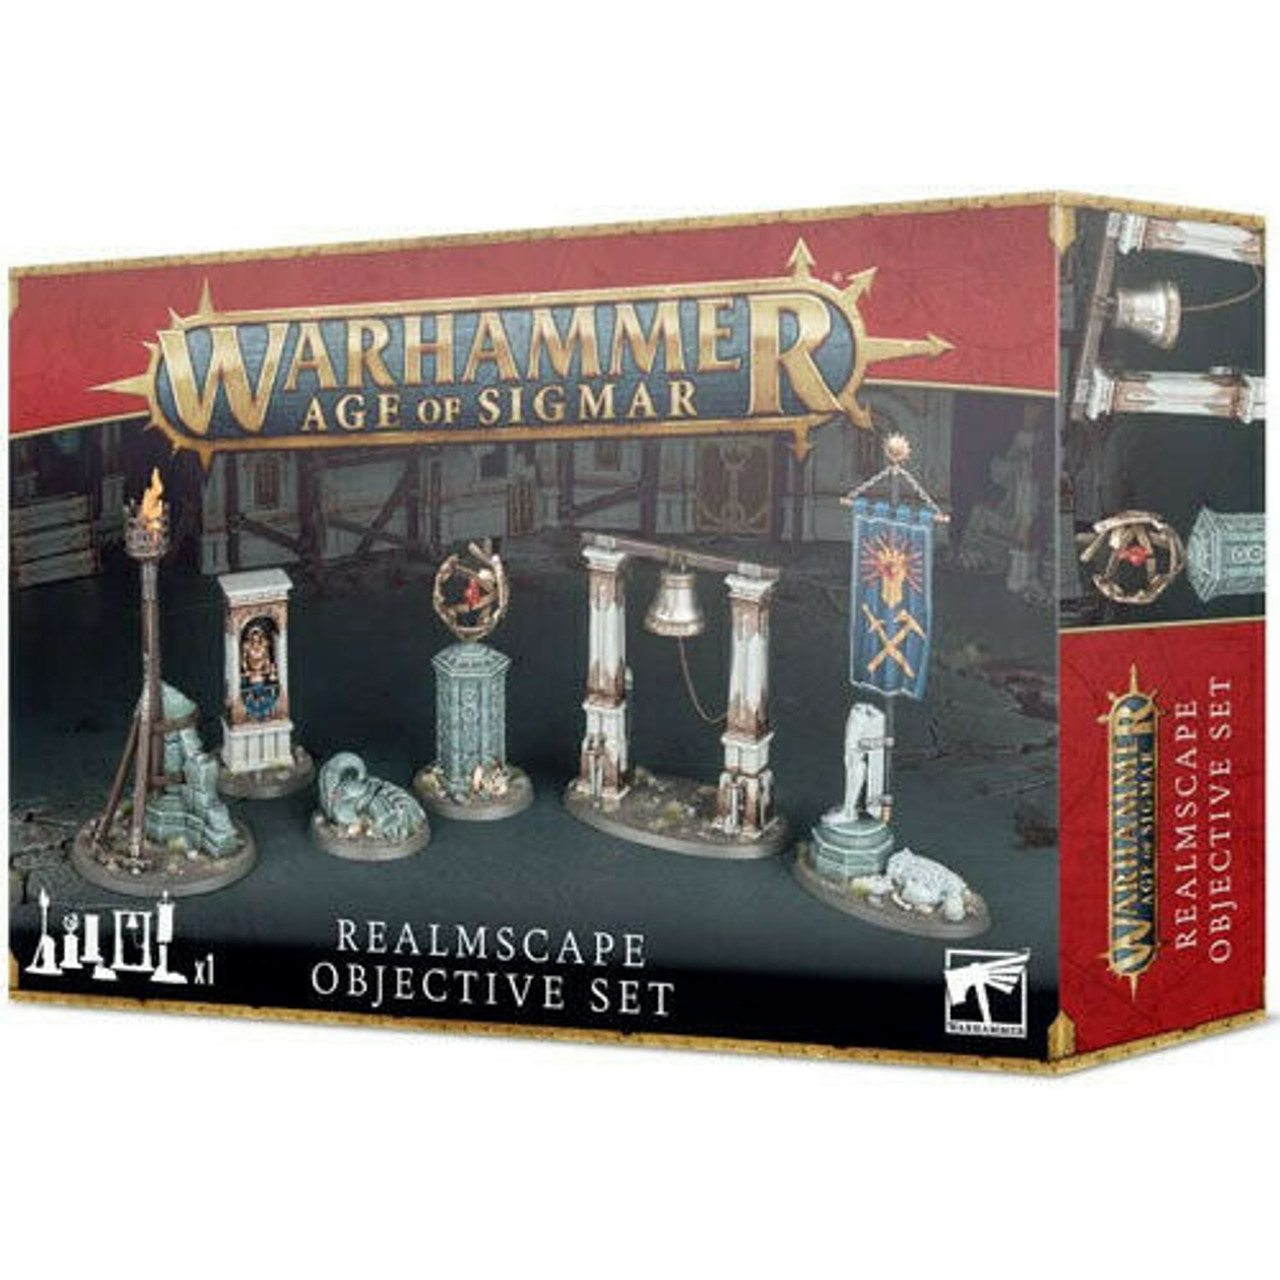 Warhammer Age of Sigmar: Realmscape Objective Set -=NEW=-